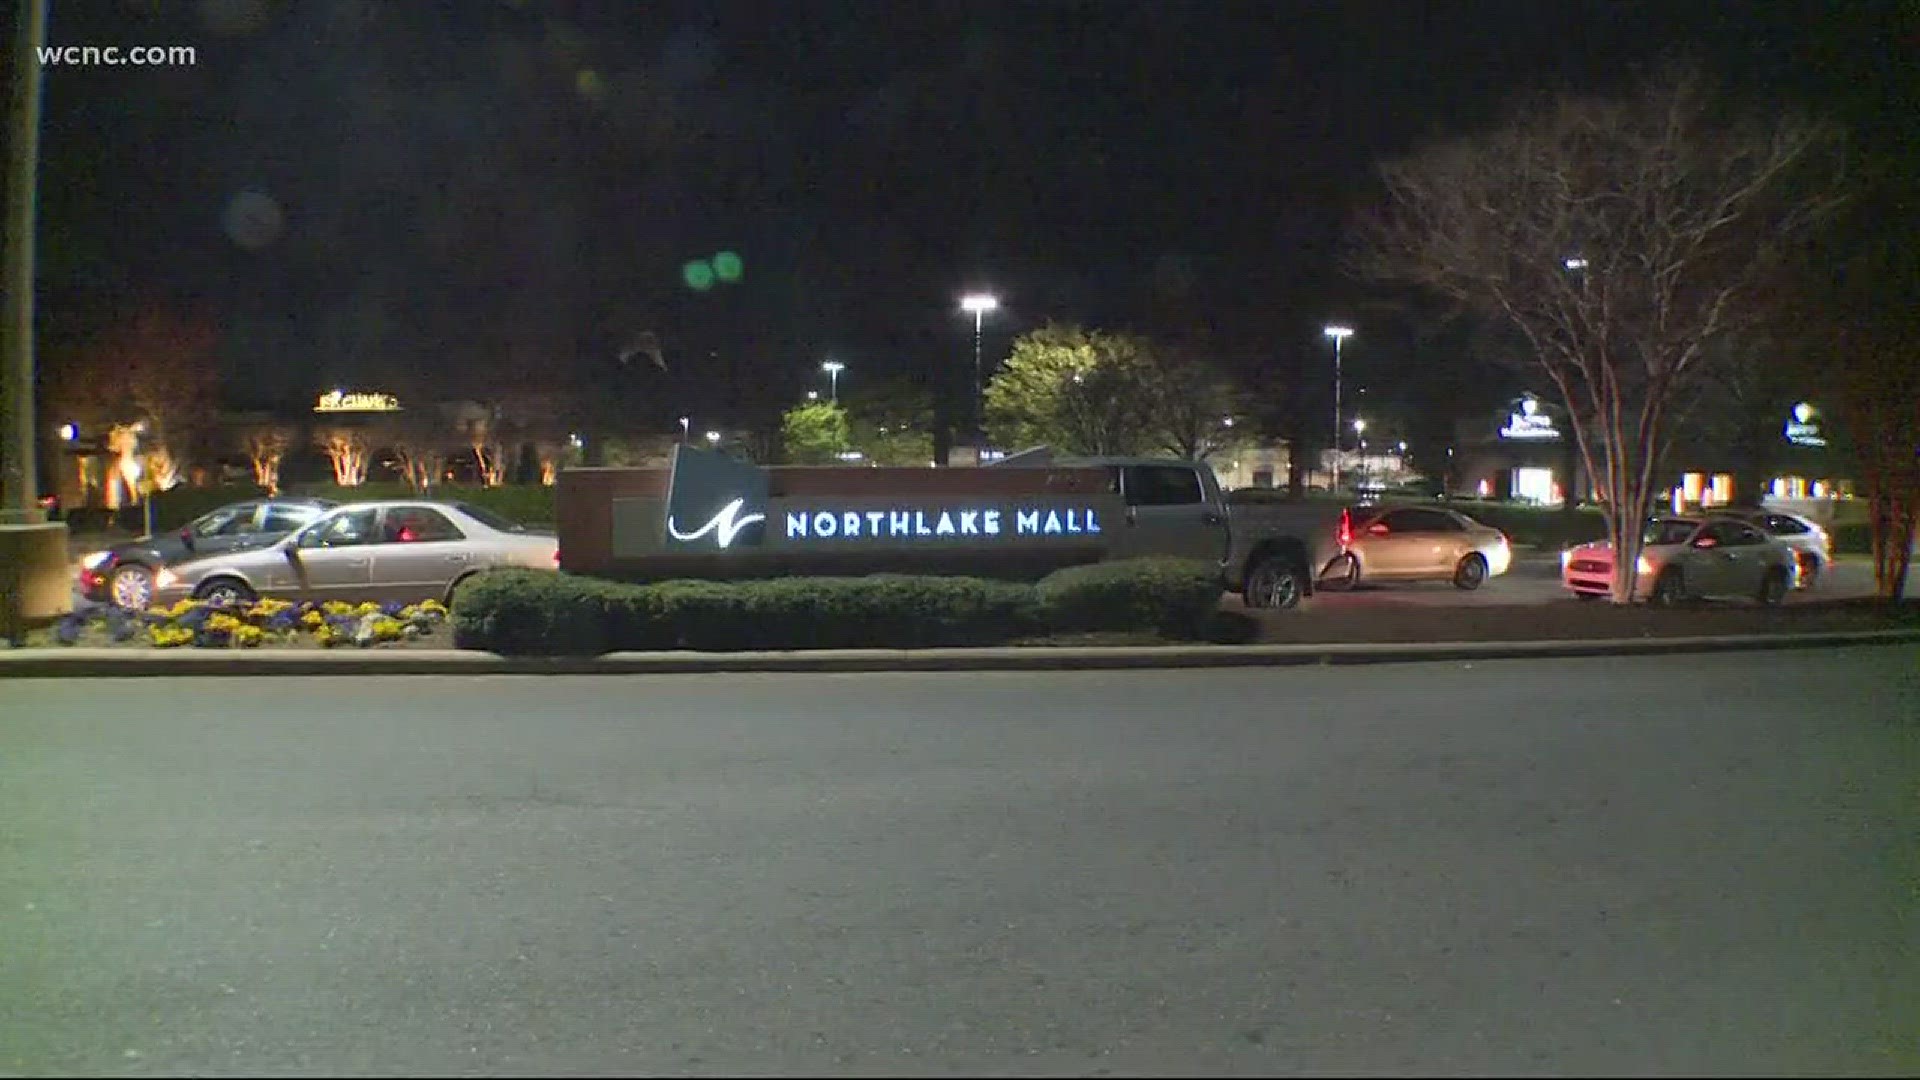 CMPD responded to a call of shots fired near Northlake Mall Saturday night.